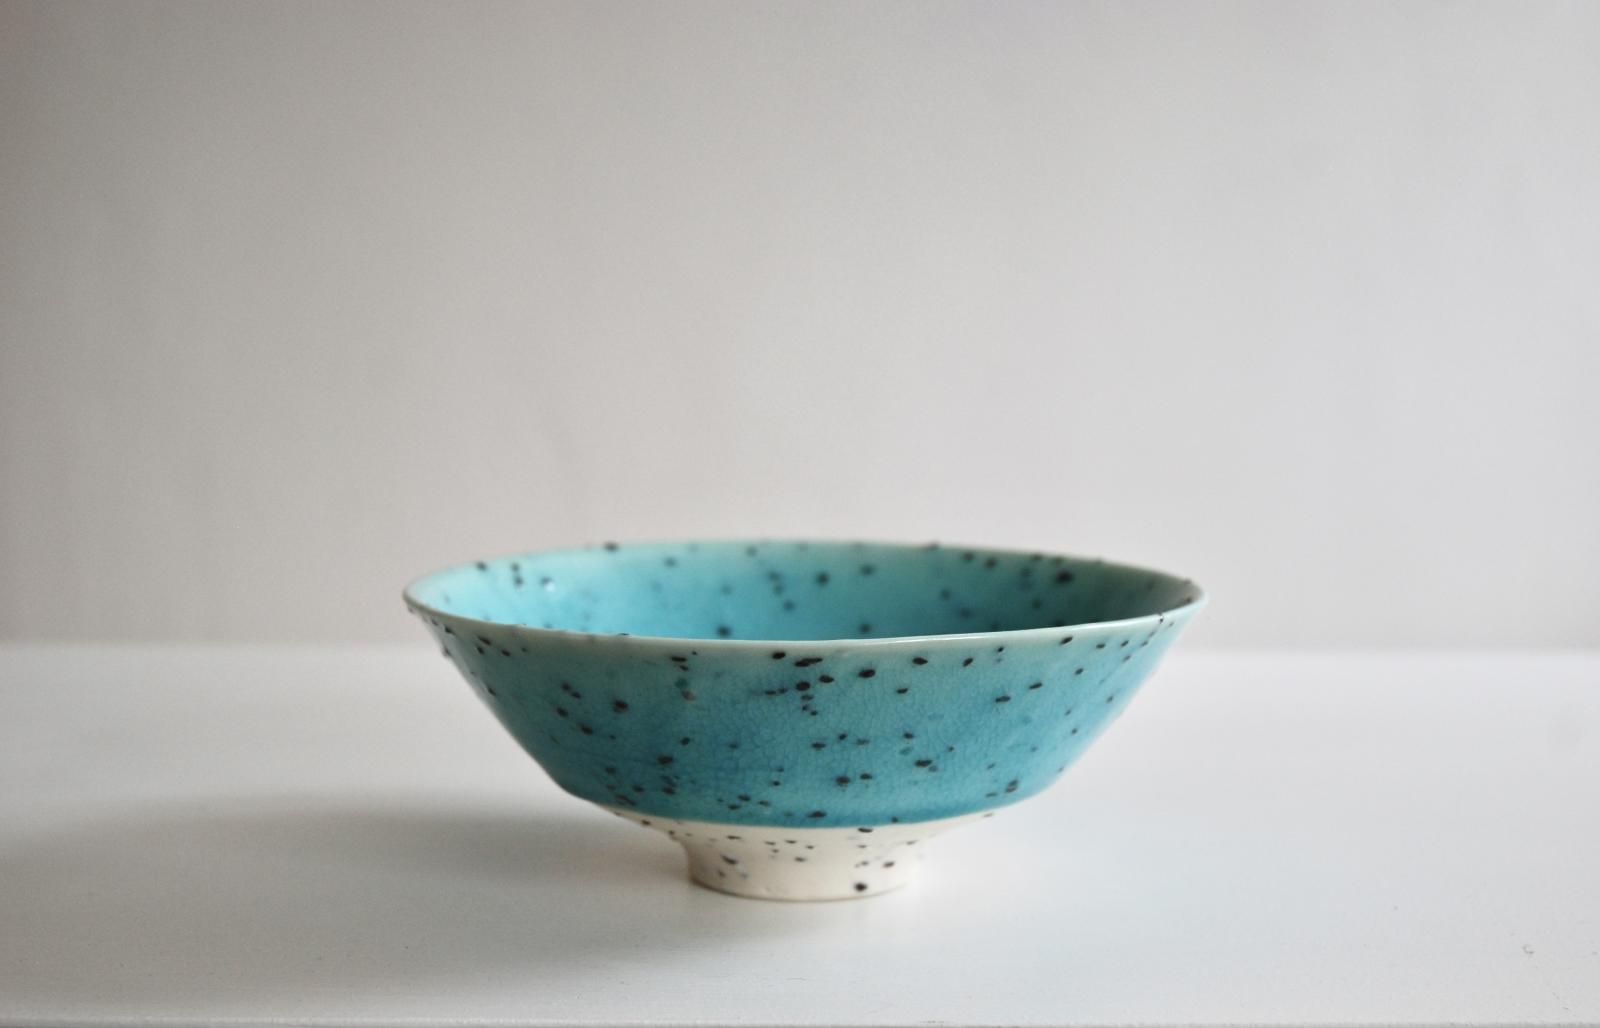 Medium river grogged porcelain turquoise bowl by Peter Wills